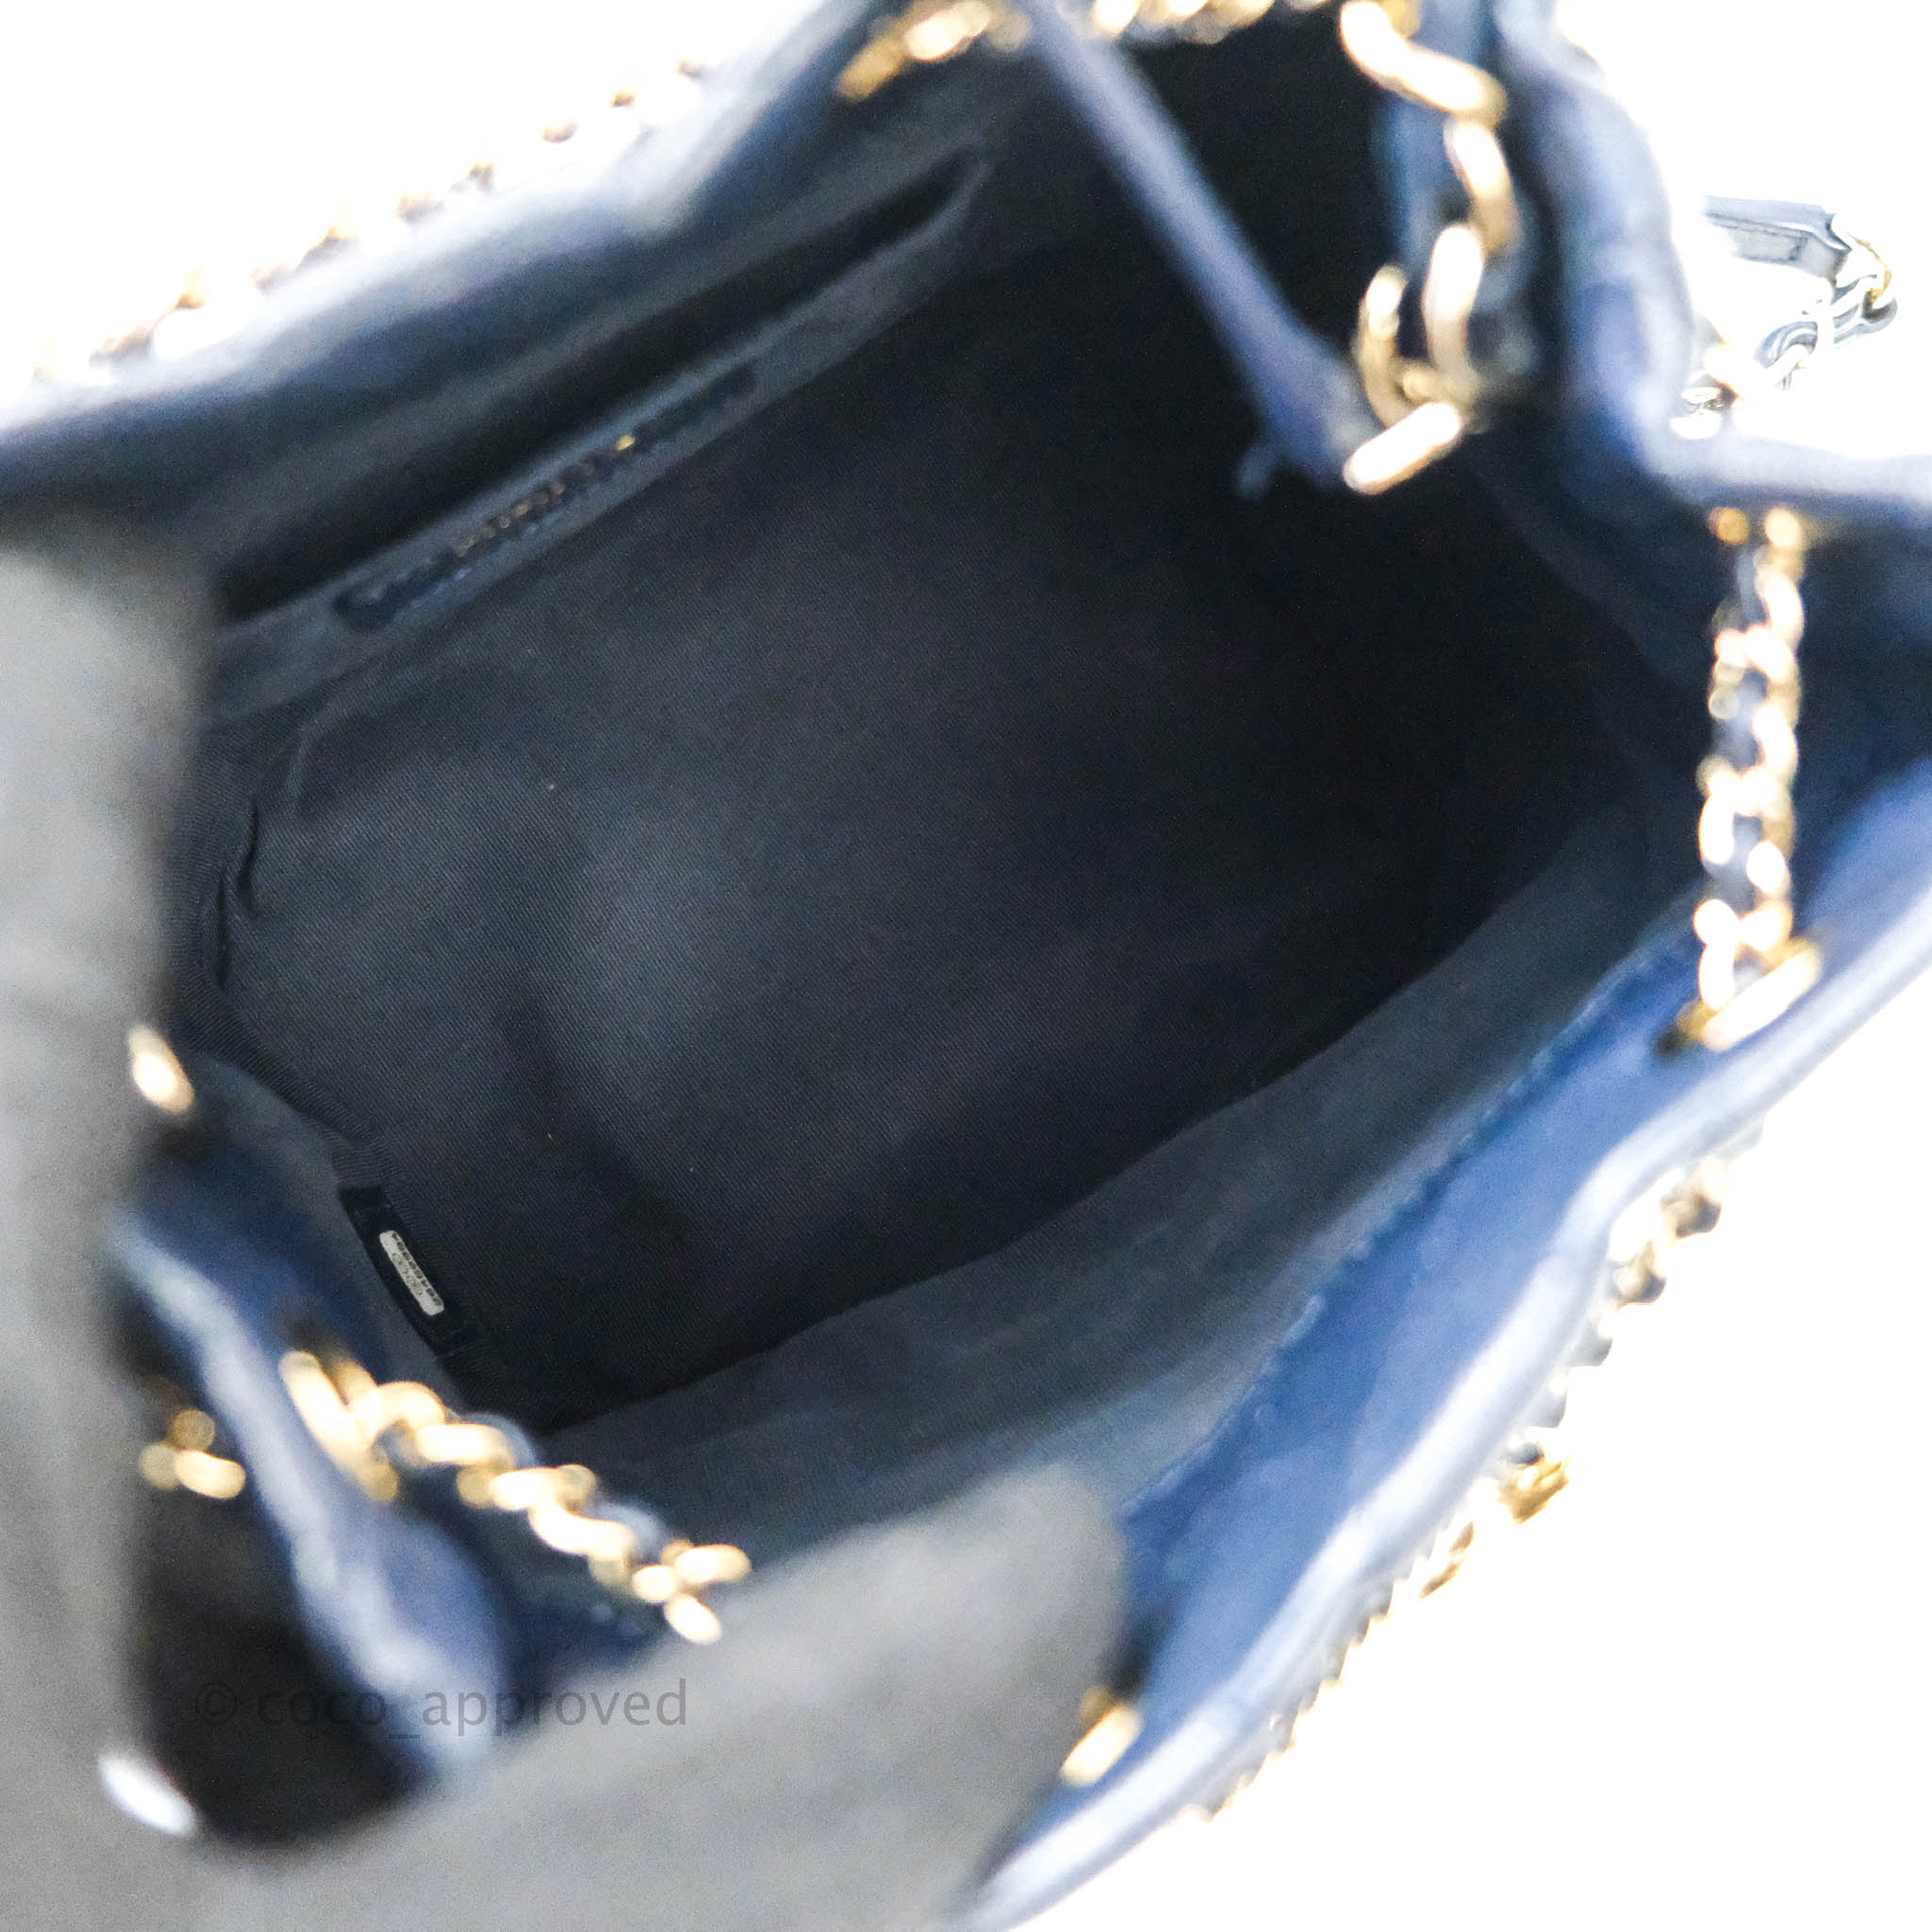 Chanel Caviar Quilted Rolled Up Bucket Drawstring Bag Navy Gold